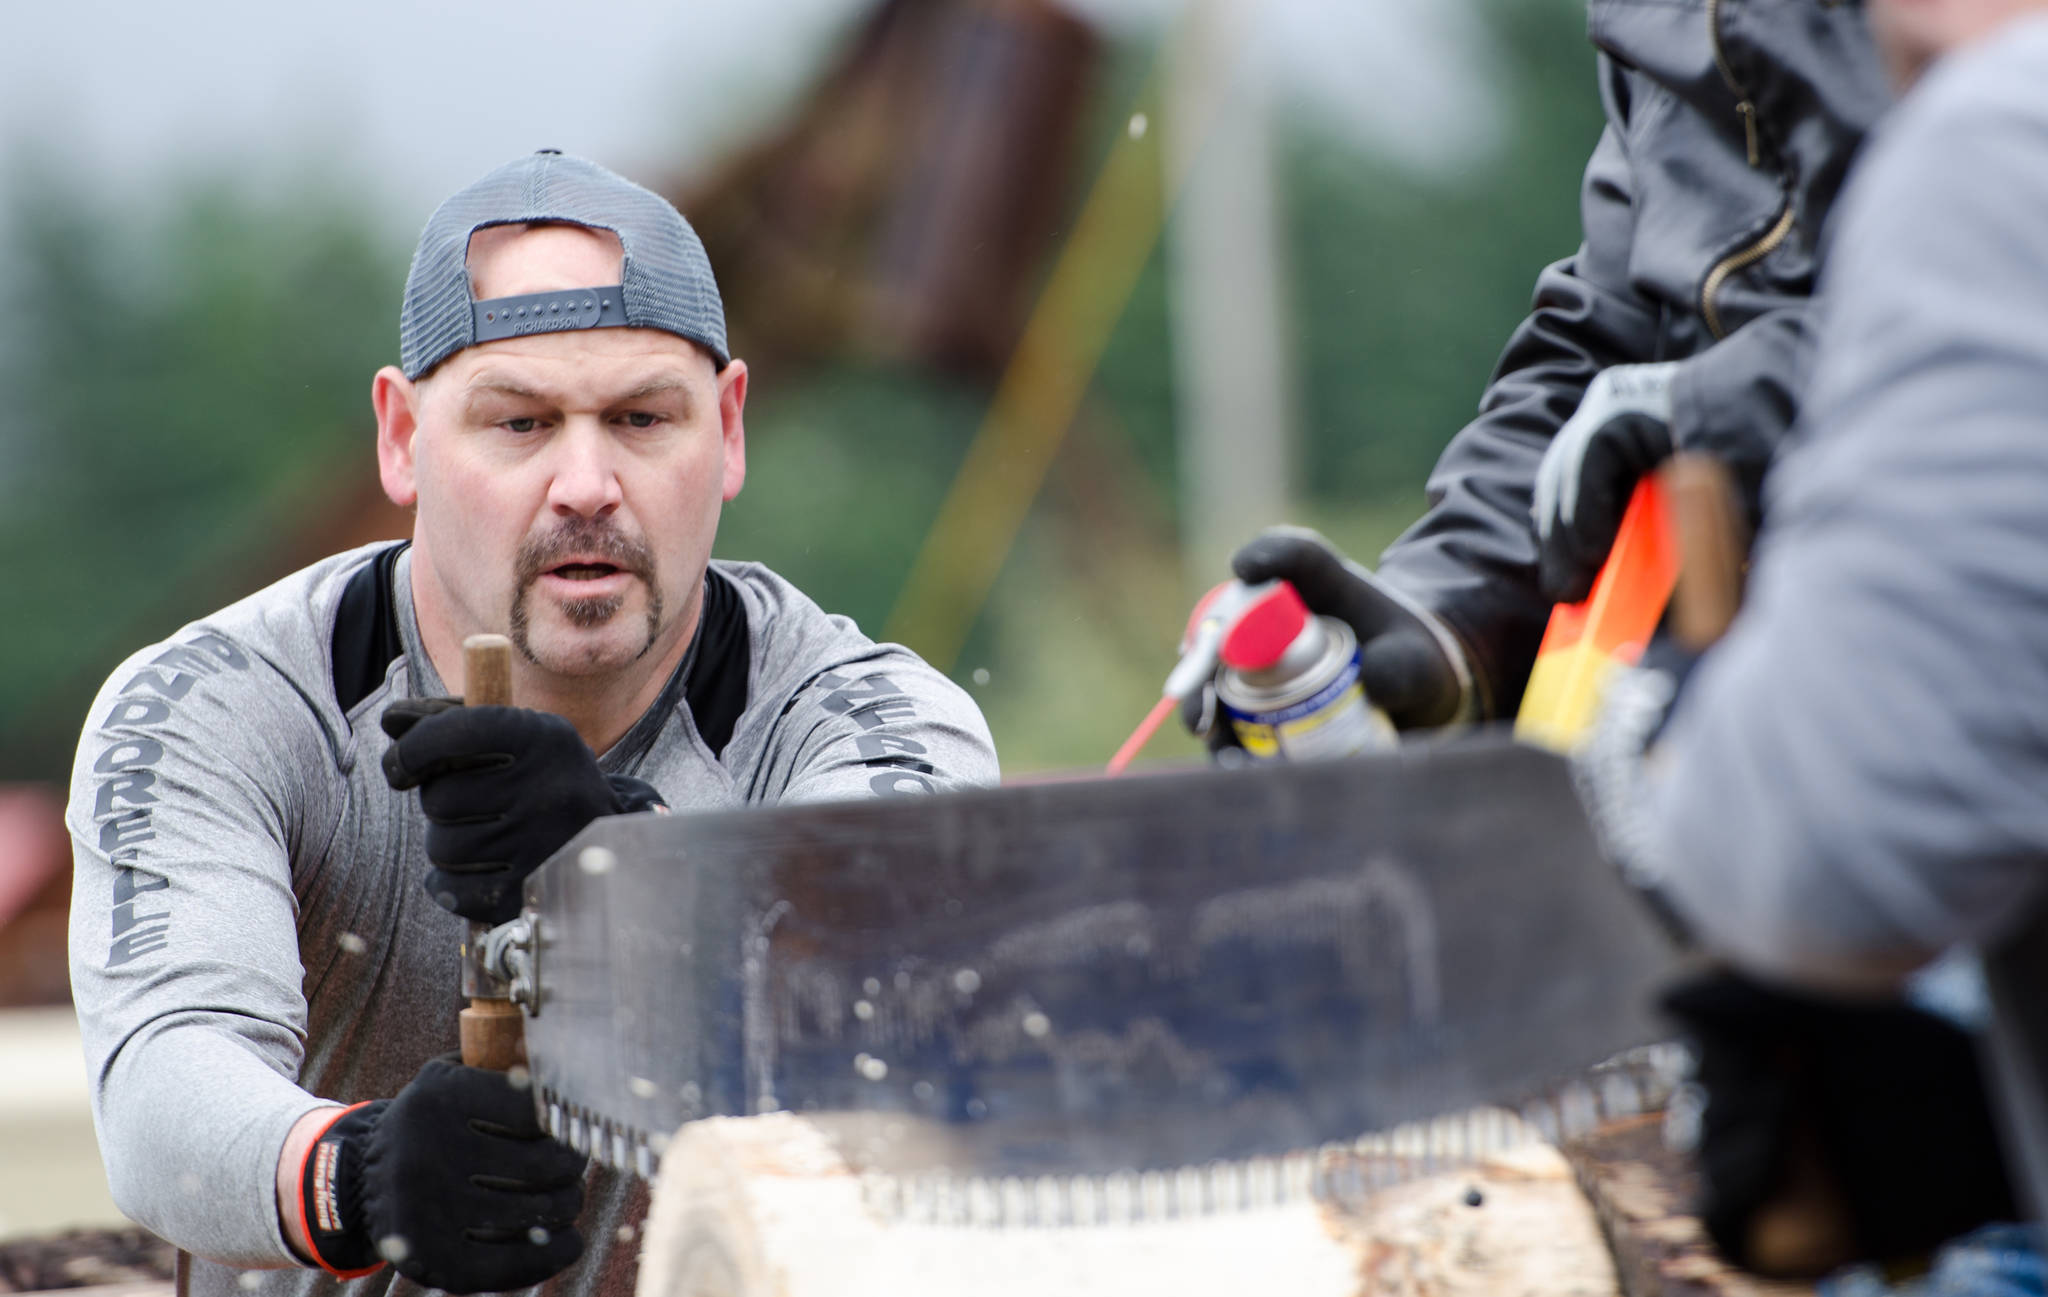 Dominic Hoy competes in the men’s team hand bucking during the 28th annual Juneau Gold Rush Days at Savikko Park. (Konrad Frank | Juneau Empire File)